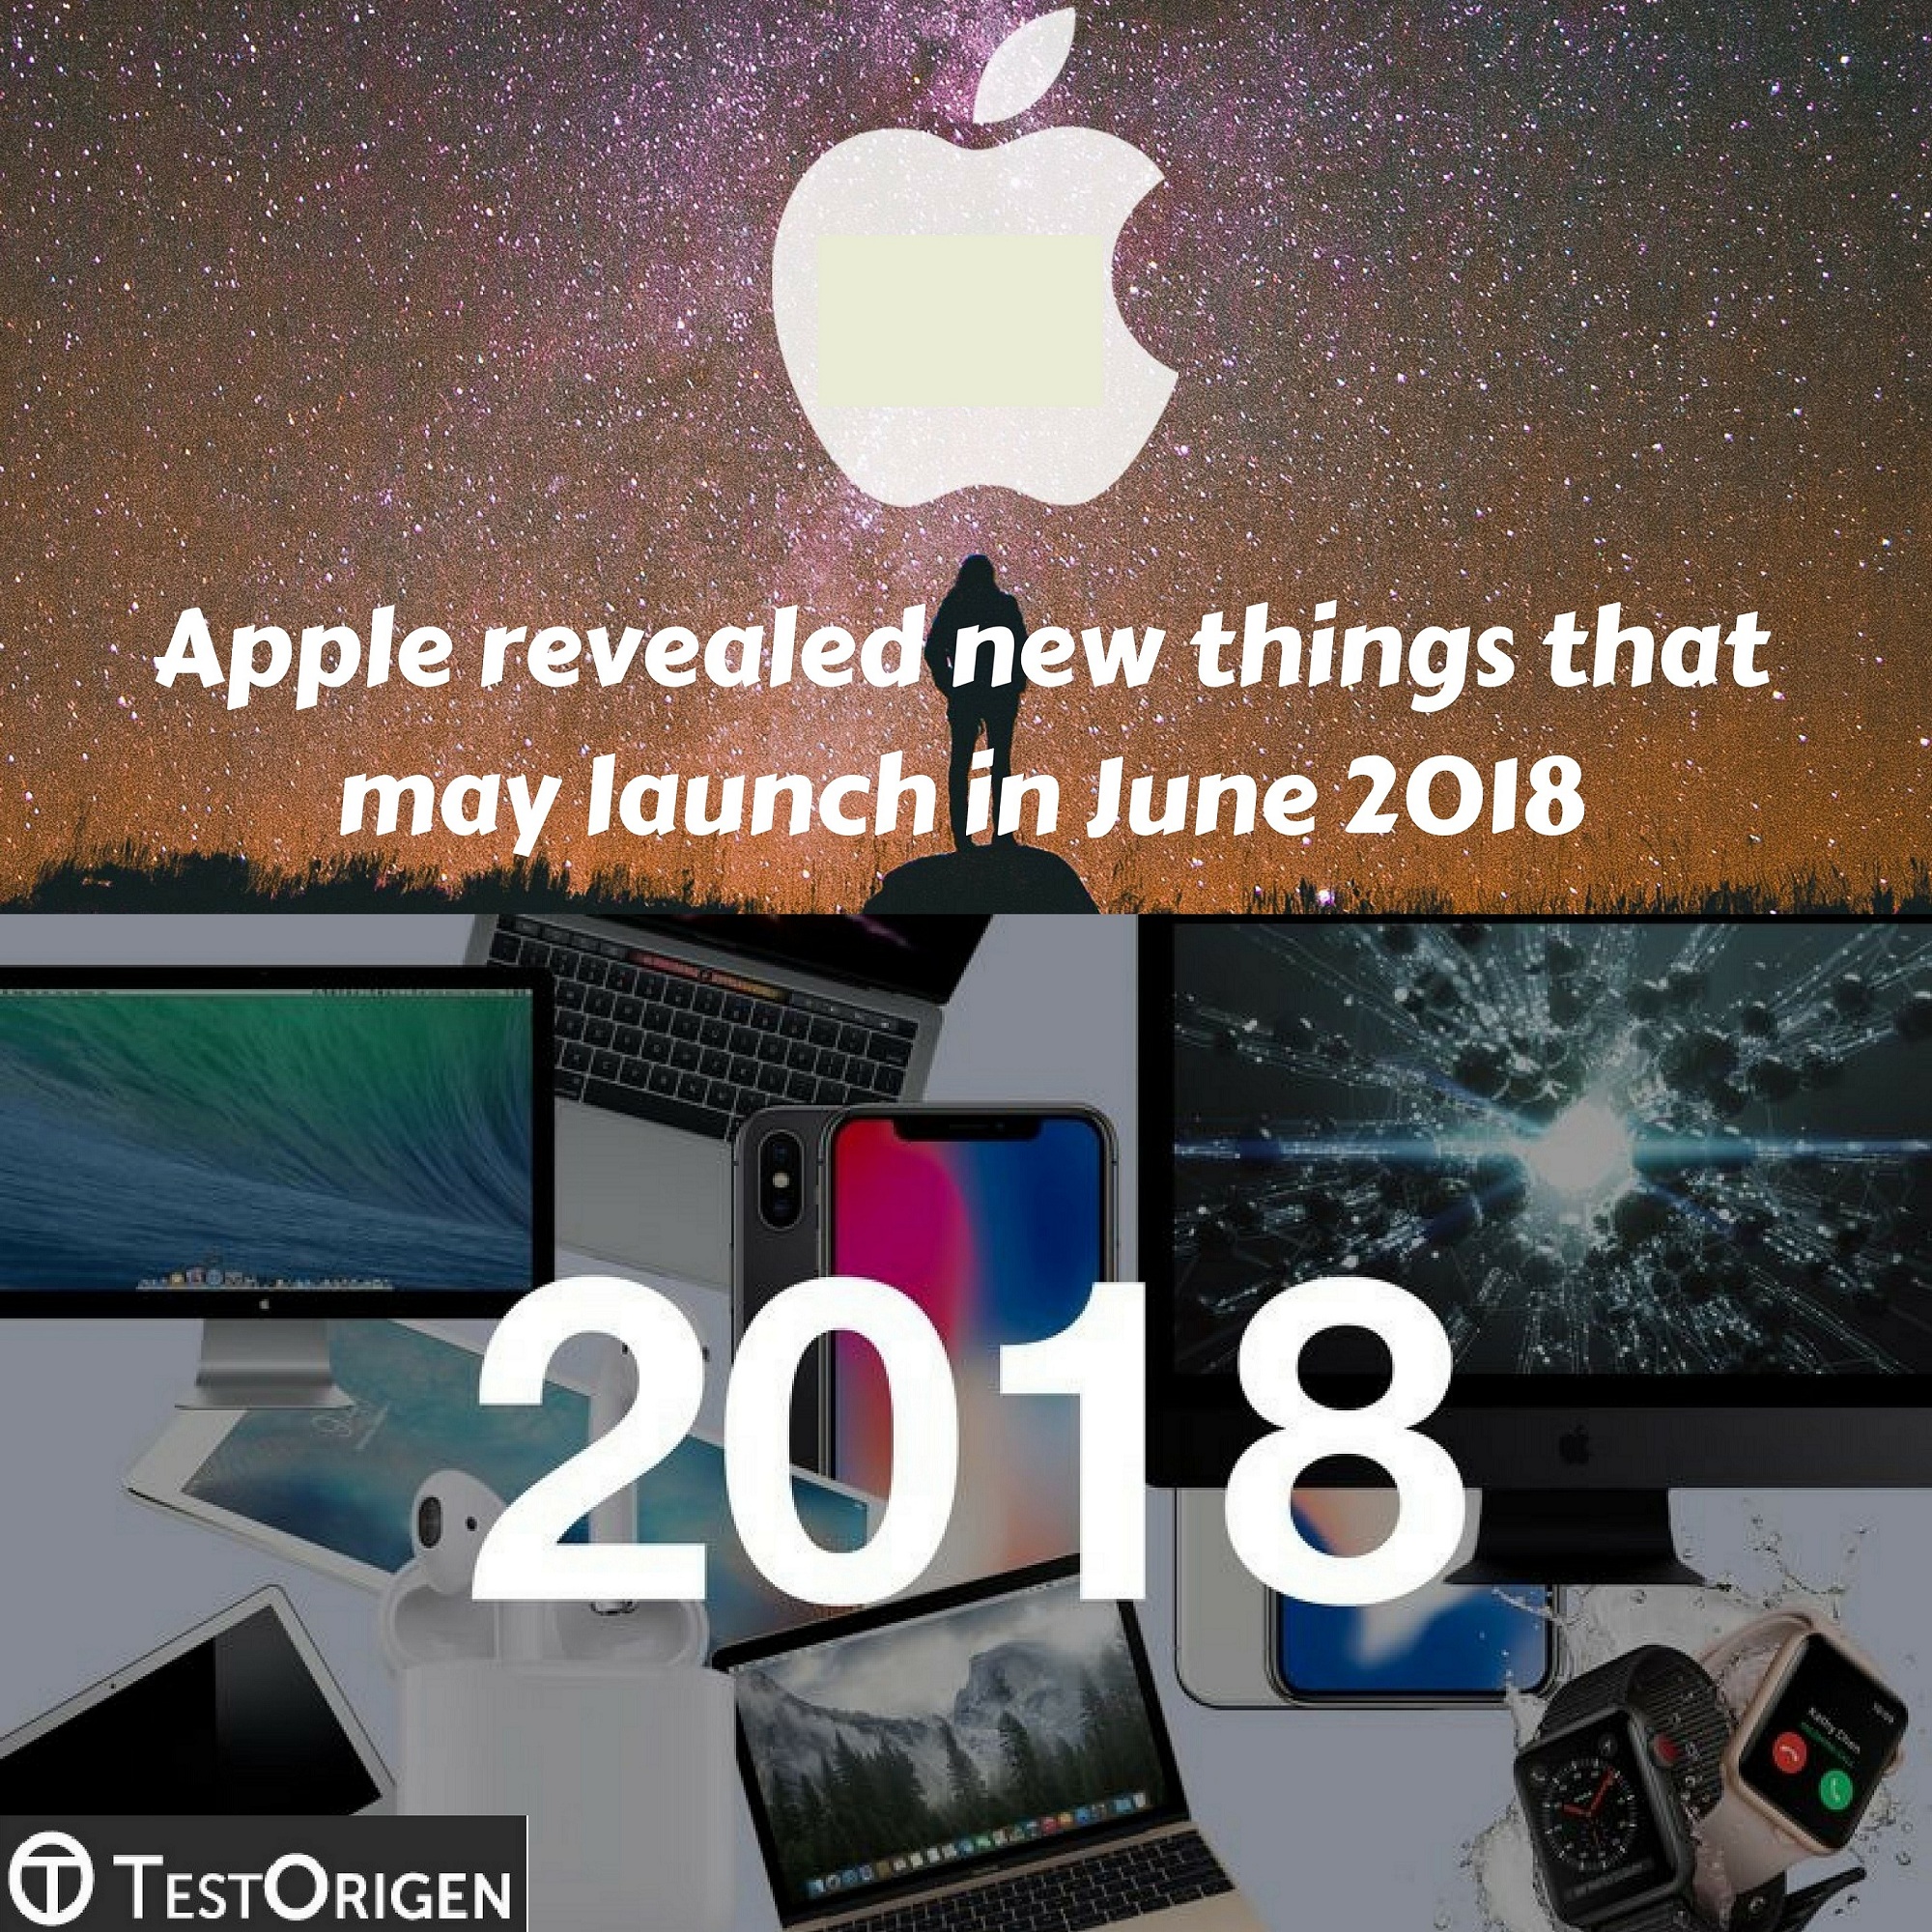 Apple revealed new things that may launch in June 2018